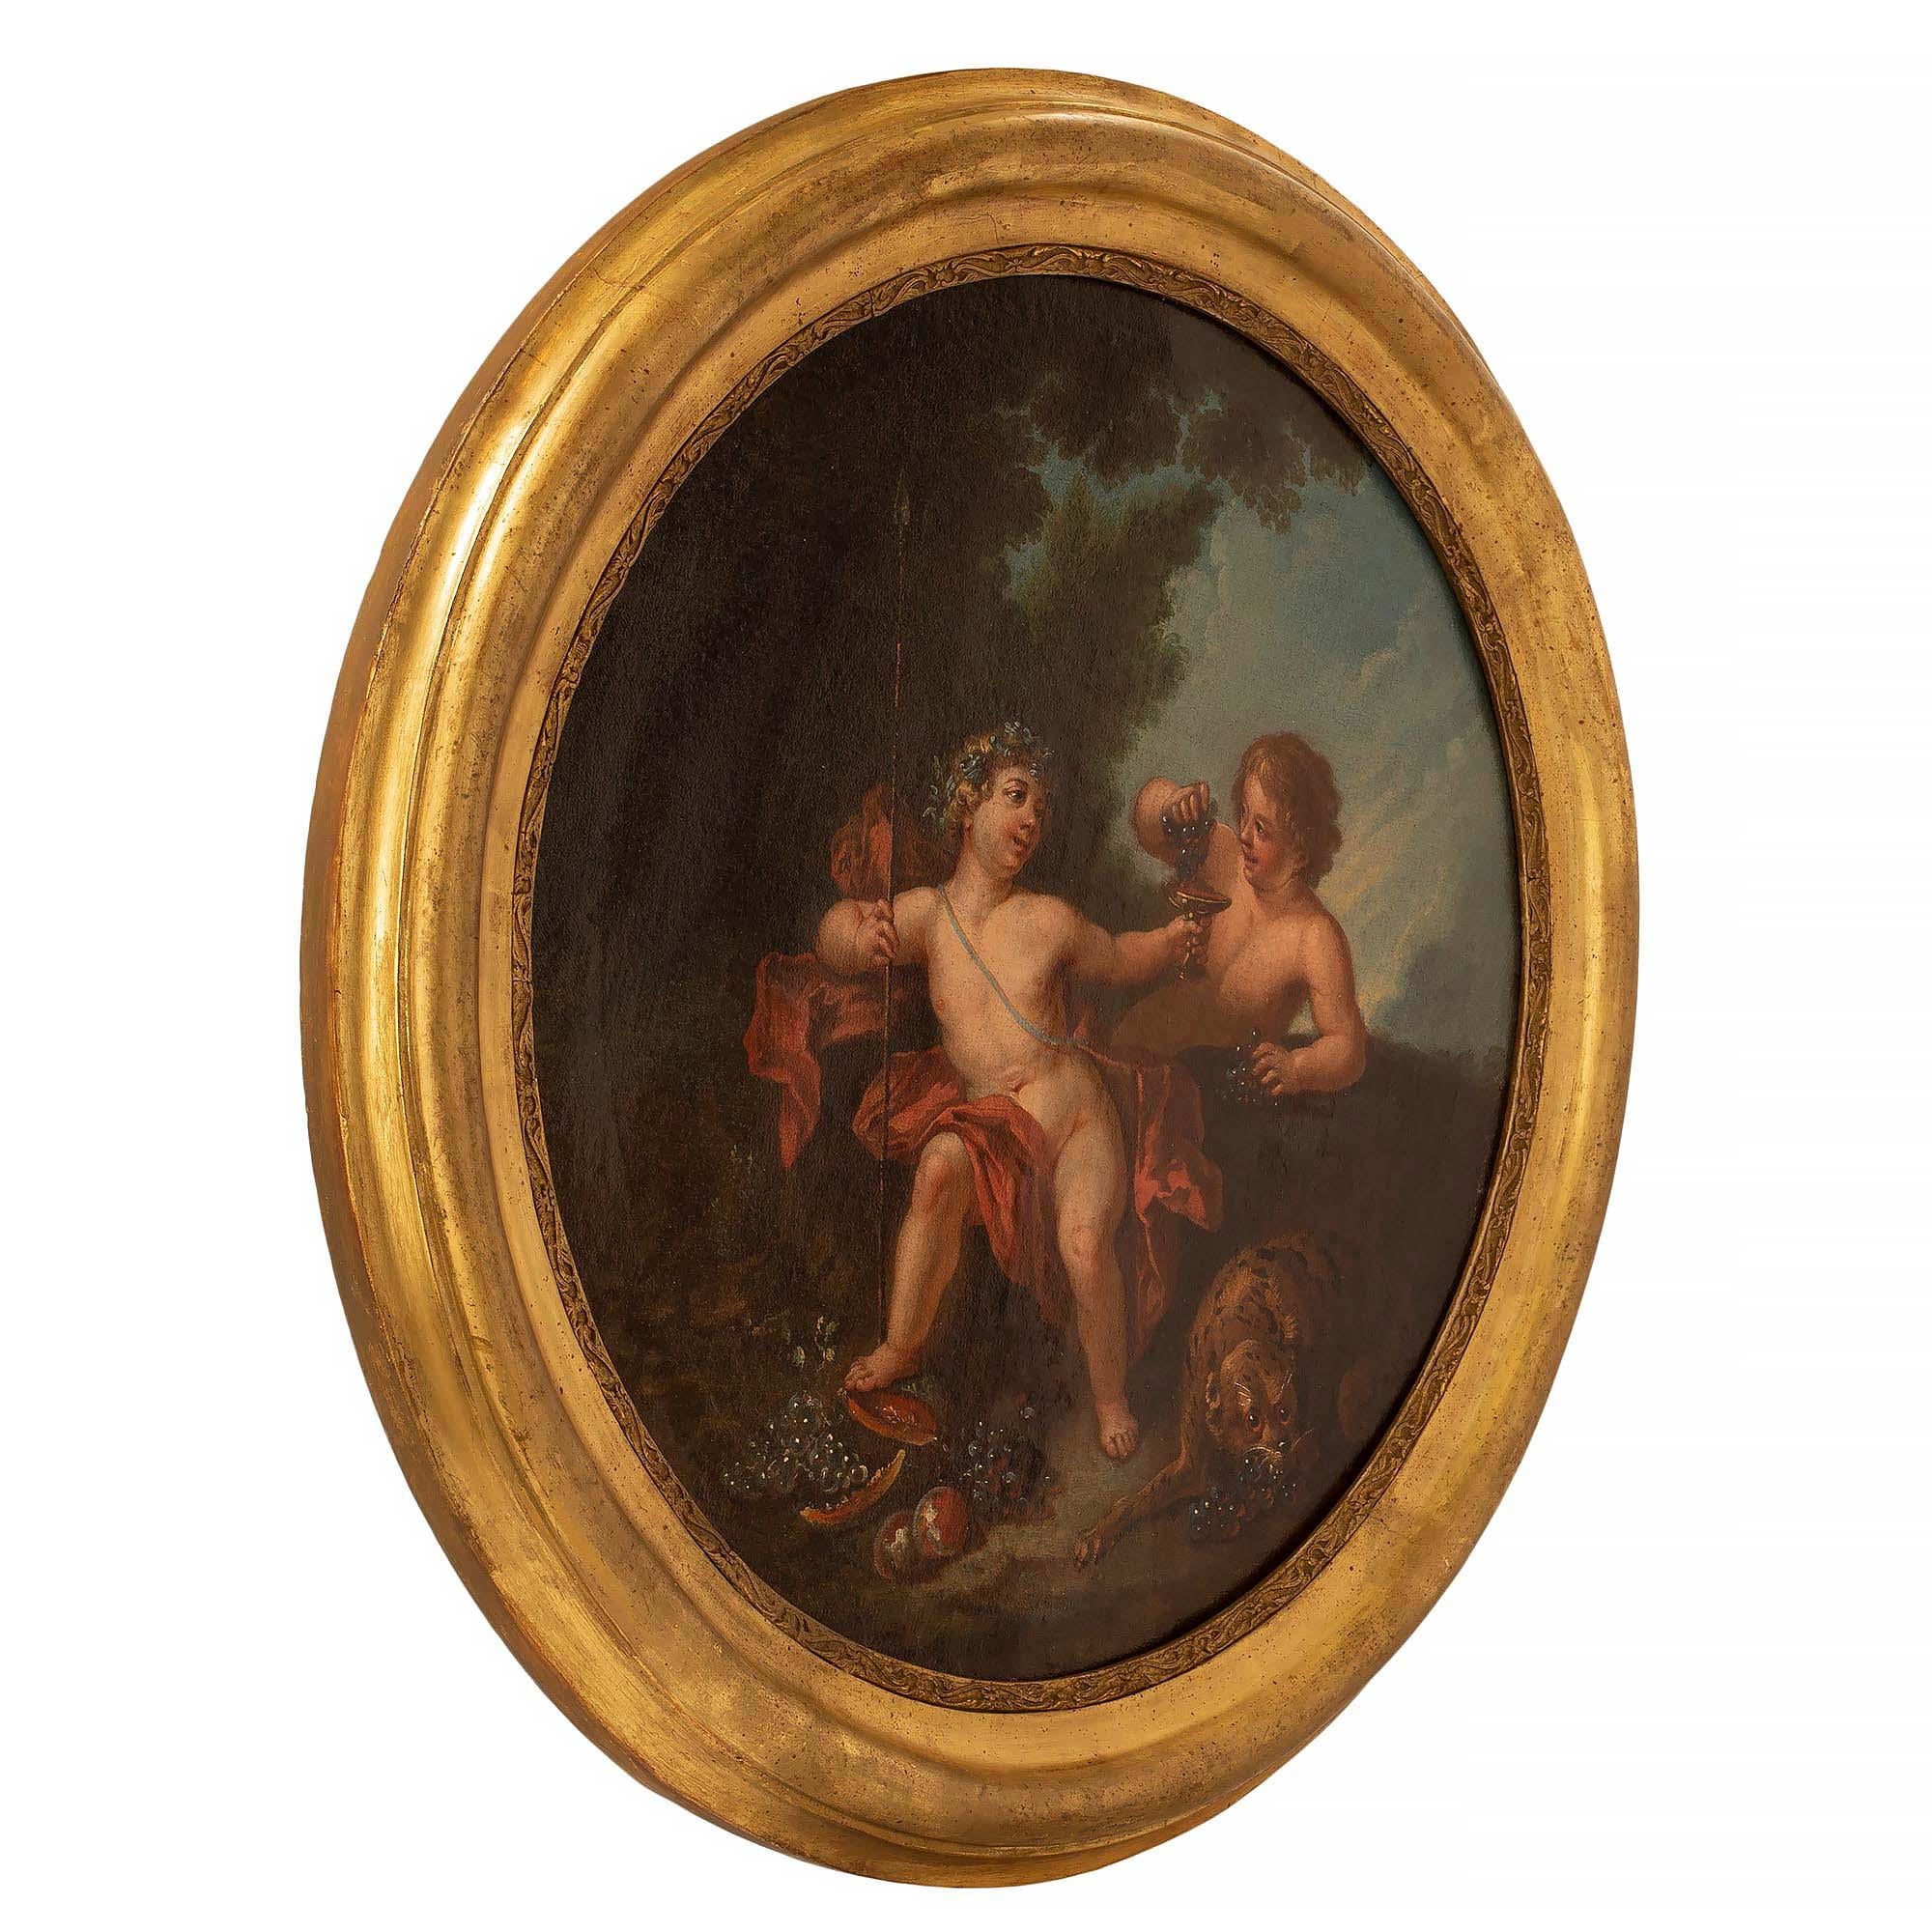 An extremely charming Italian 18th century Neo-Classical oil on canvas painting. The circular painting retains its original giltwood frame with a beautiful mottled designs and finely carved foliate border. The painting depicts two cherubs sitting